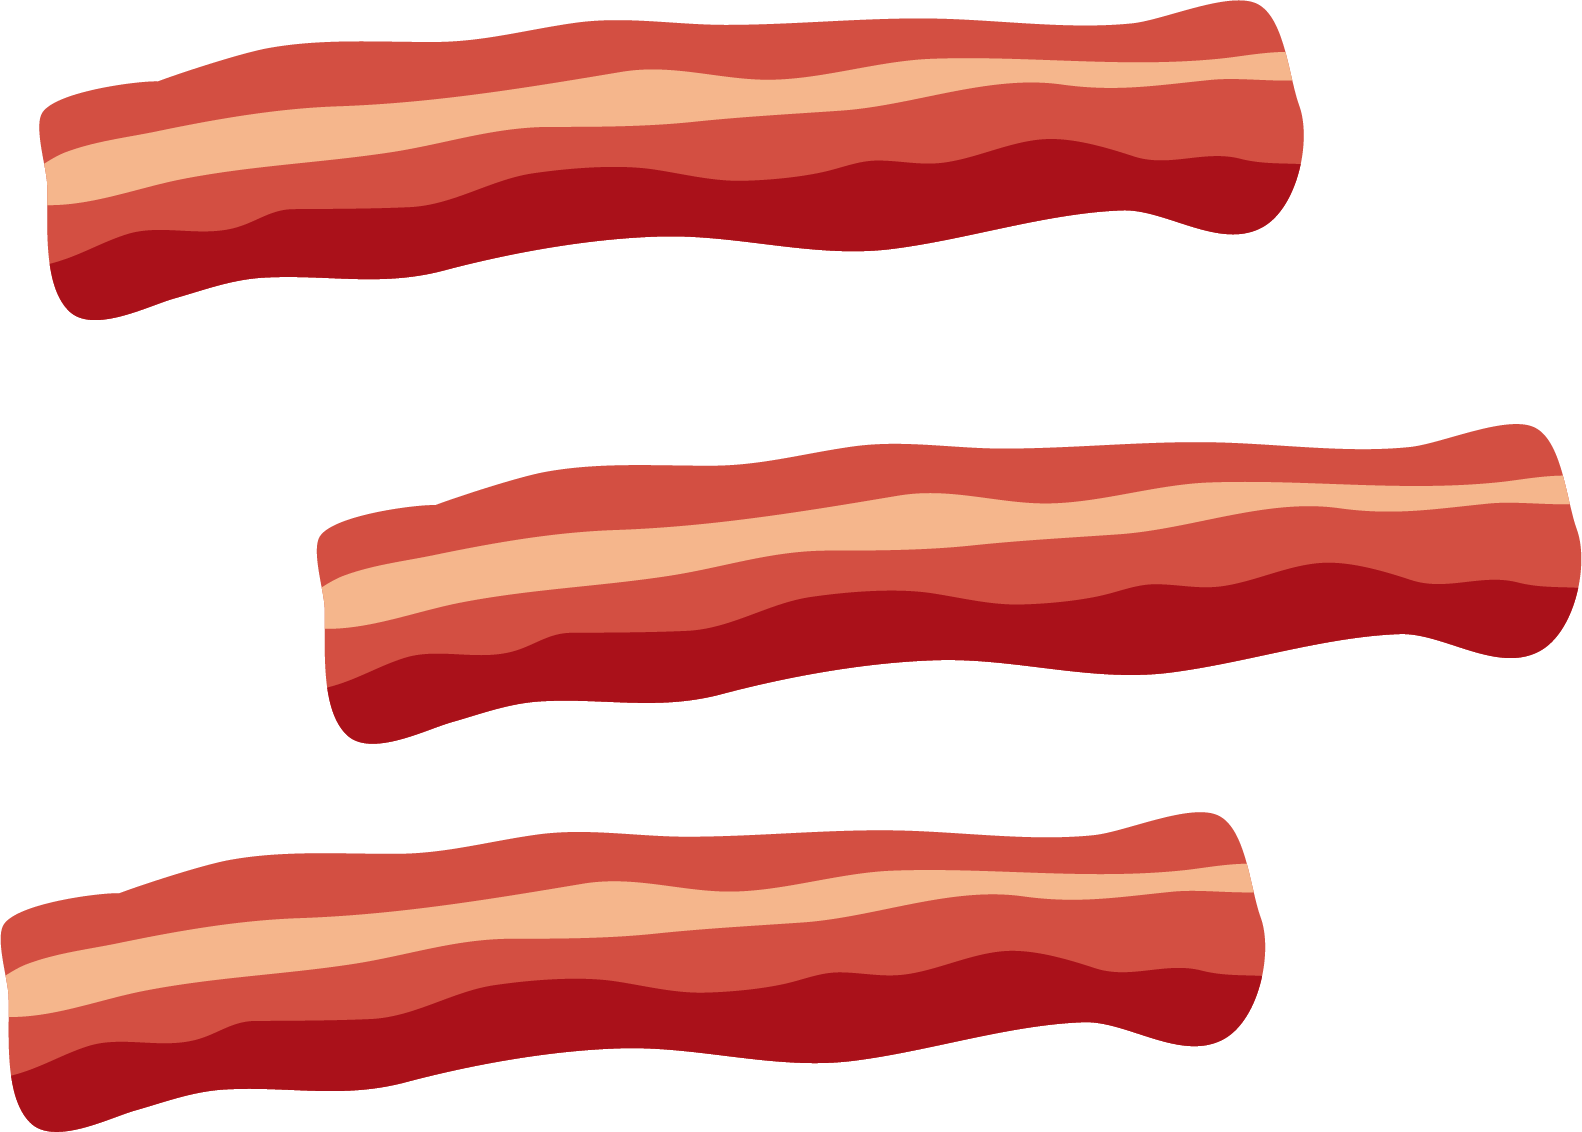 Sizzling Bacon Strips Illustration PNG